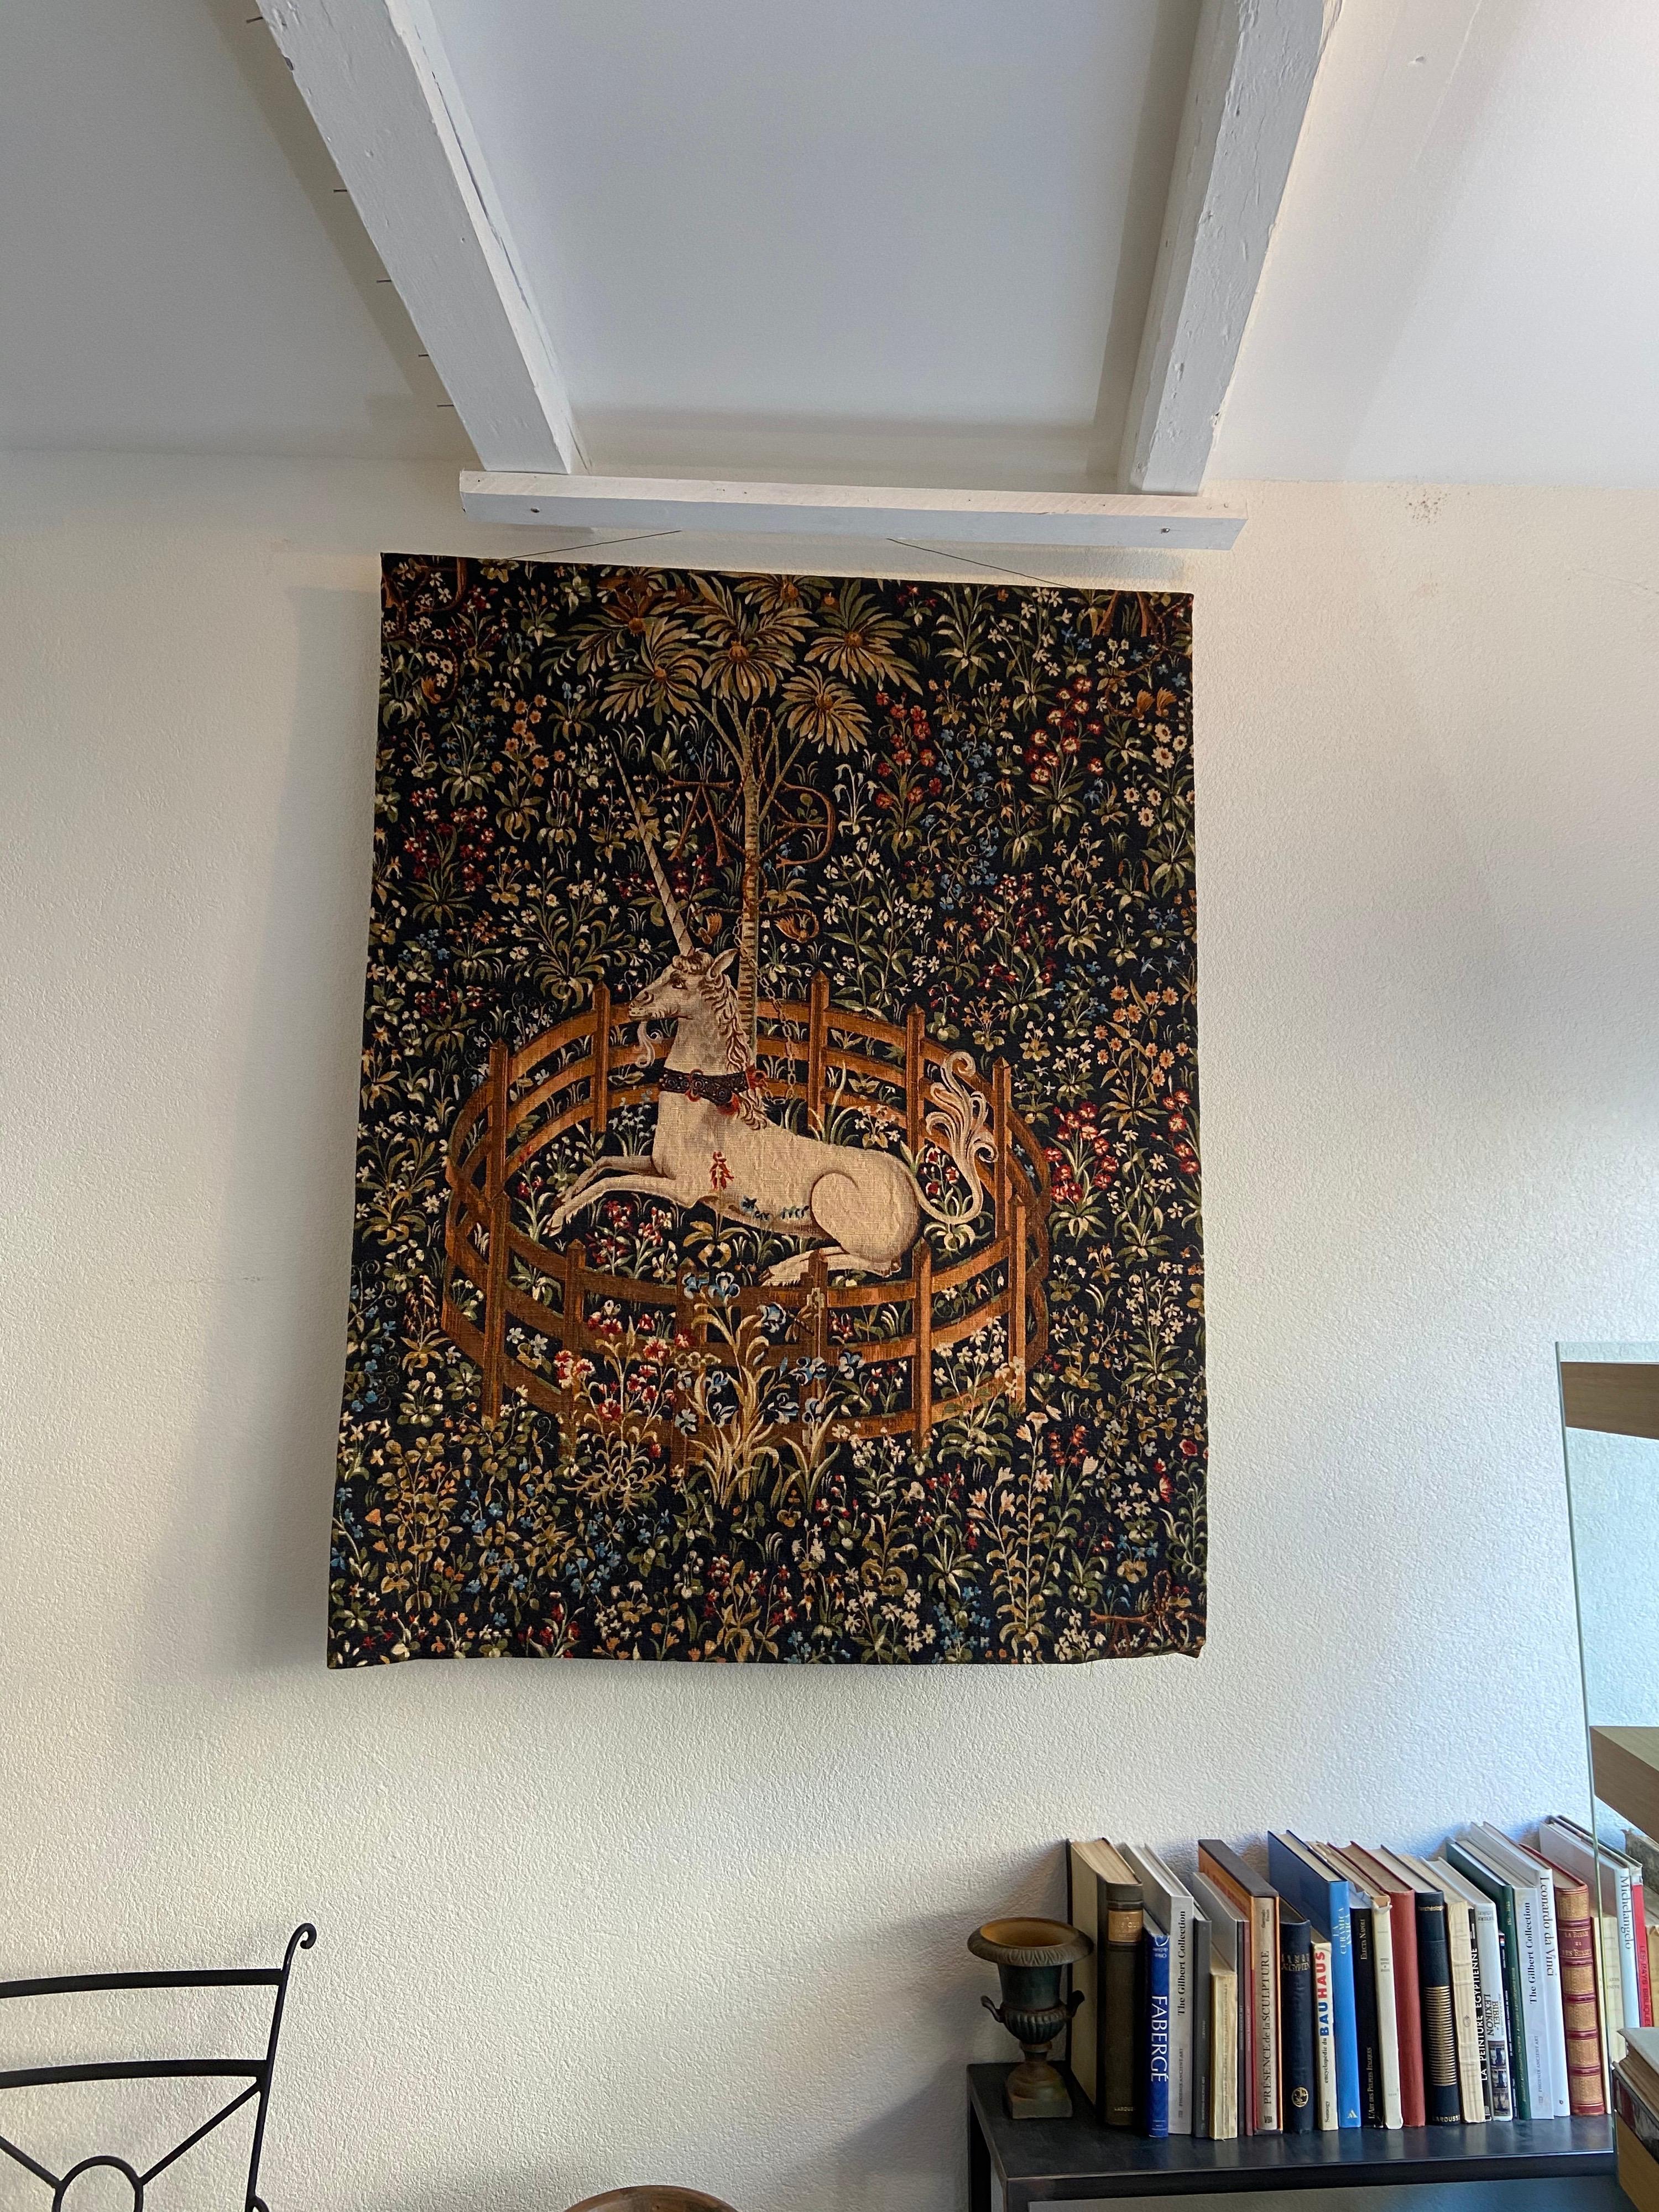 Large tapestry from the beginning of the 20th century based on a very popular scene made in 1500 called 